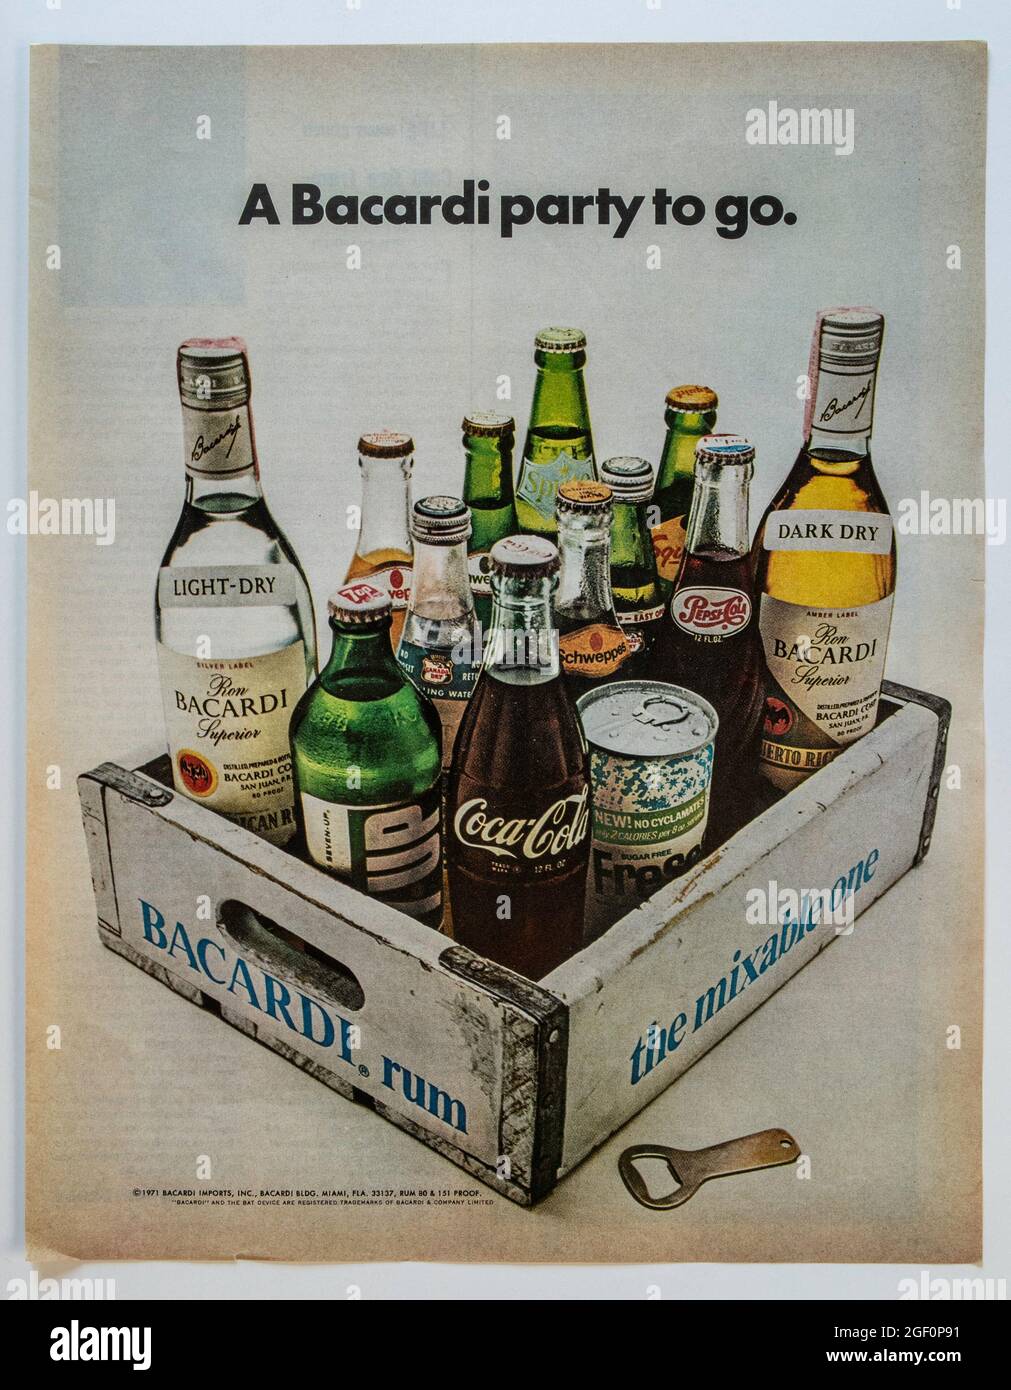 J291 Chrome Ad Postcard 4x6 for Bacardi turned out to be sad for the World Trade